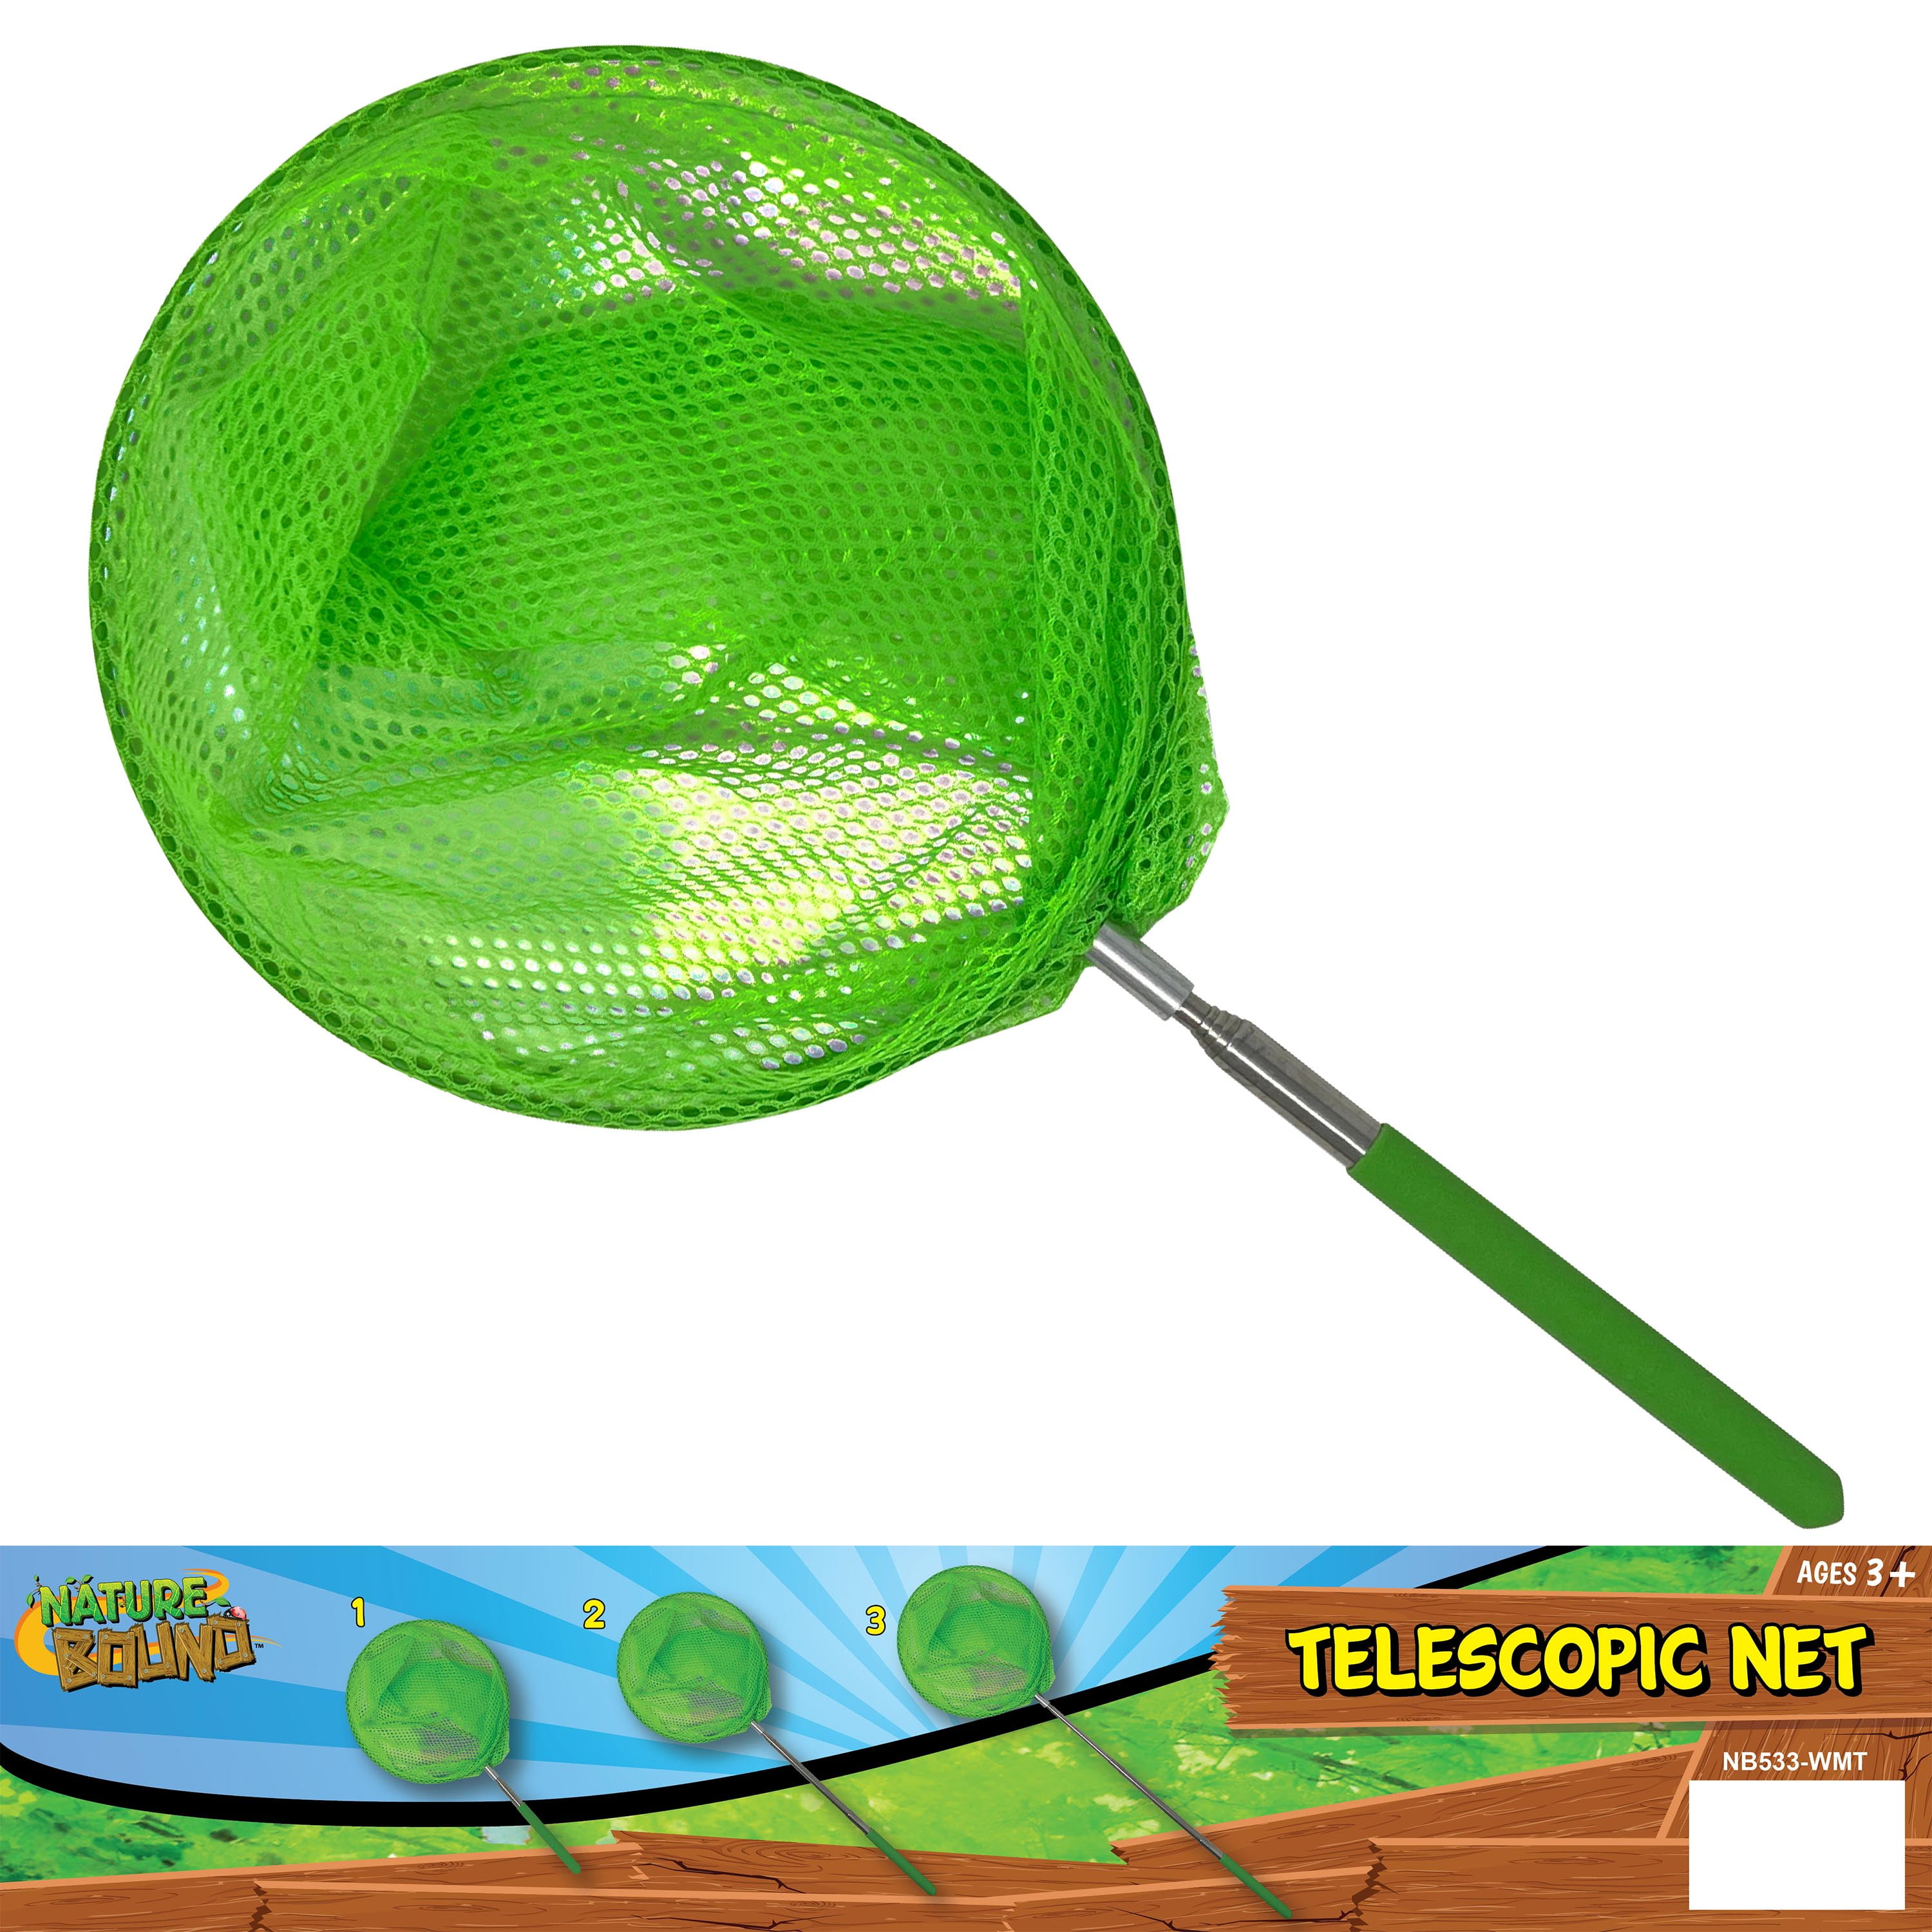 Retractable Butterfly Net Toy by Nature Bound, Bug Catcher for Kids